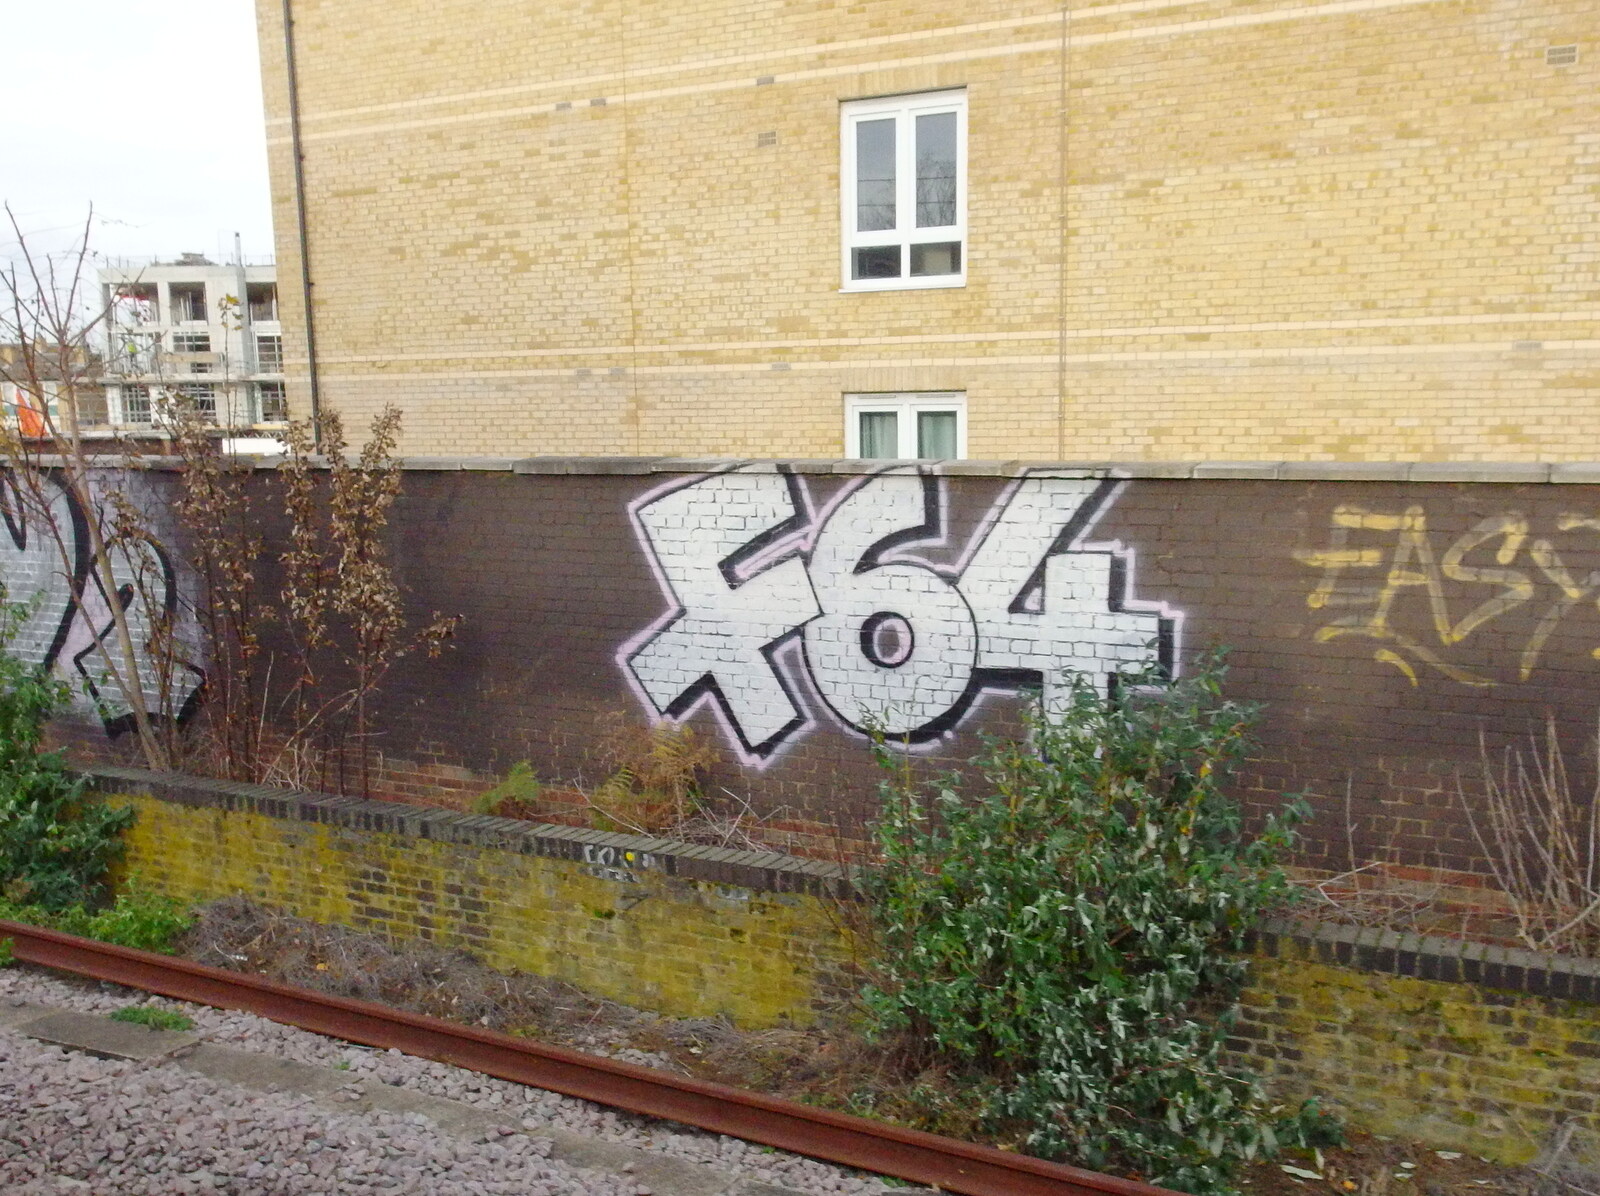 SwiftKey's Arcade Cabinet, and the Streets of Southwark, London - 5th December 2013: F64 graffiti